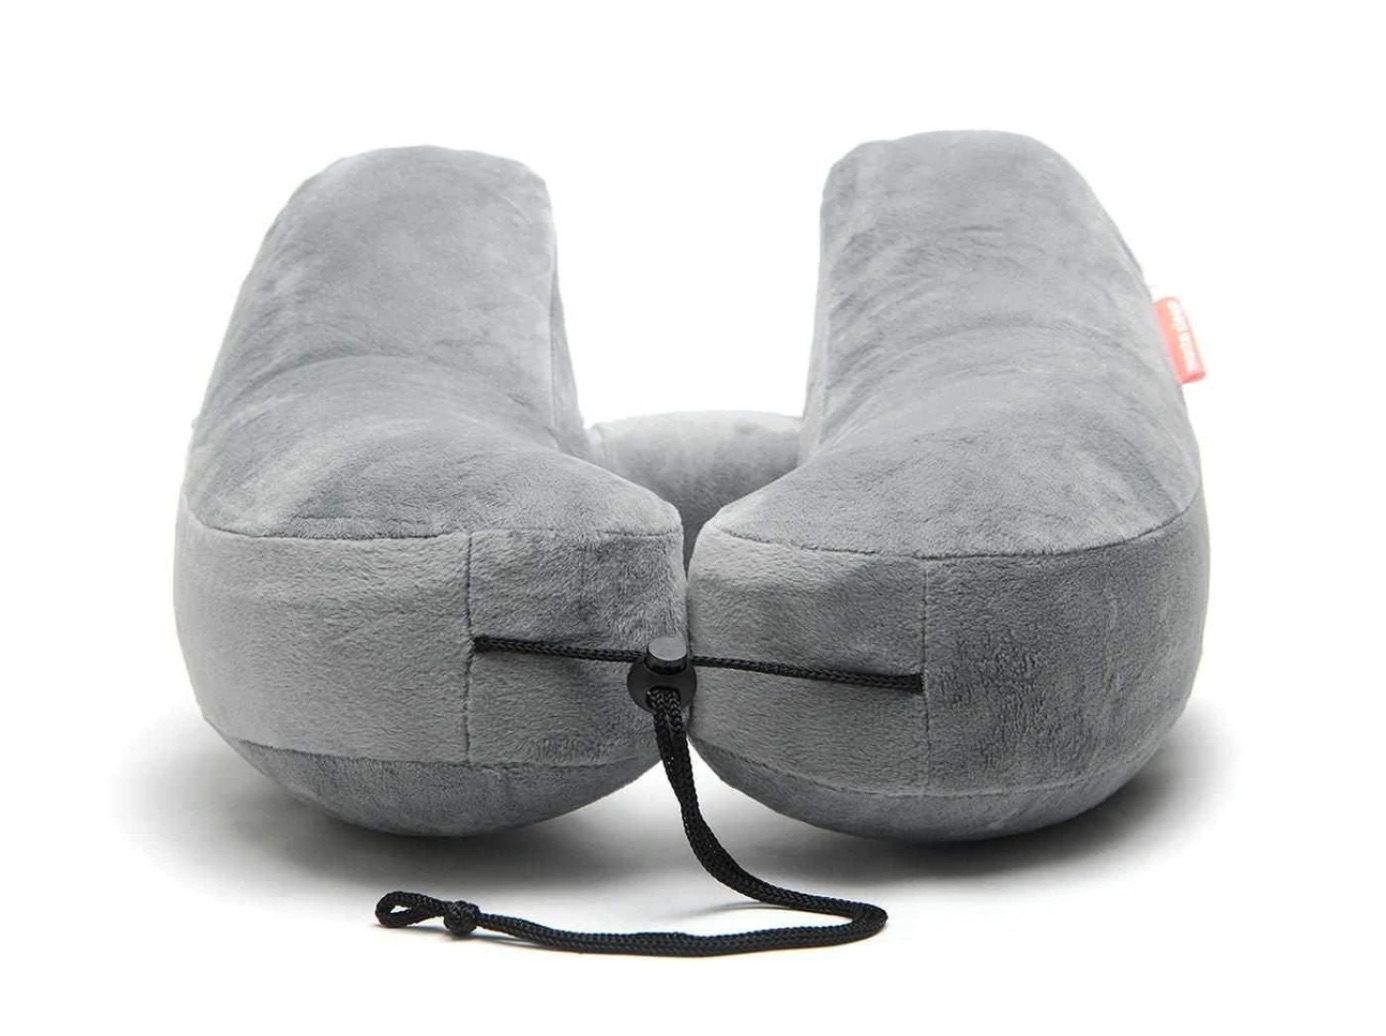 Product page photo of the Manta Sleep Travel Pillow